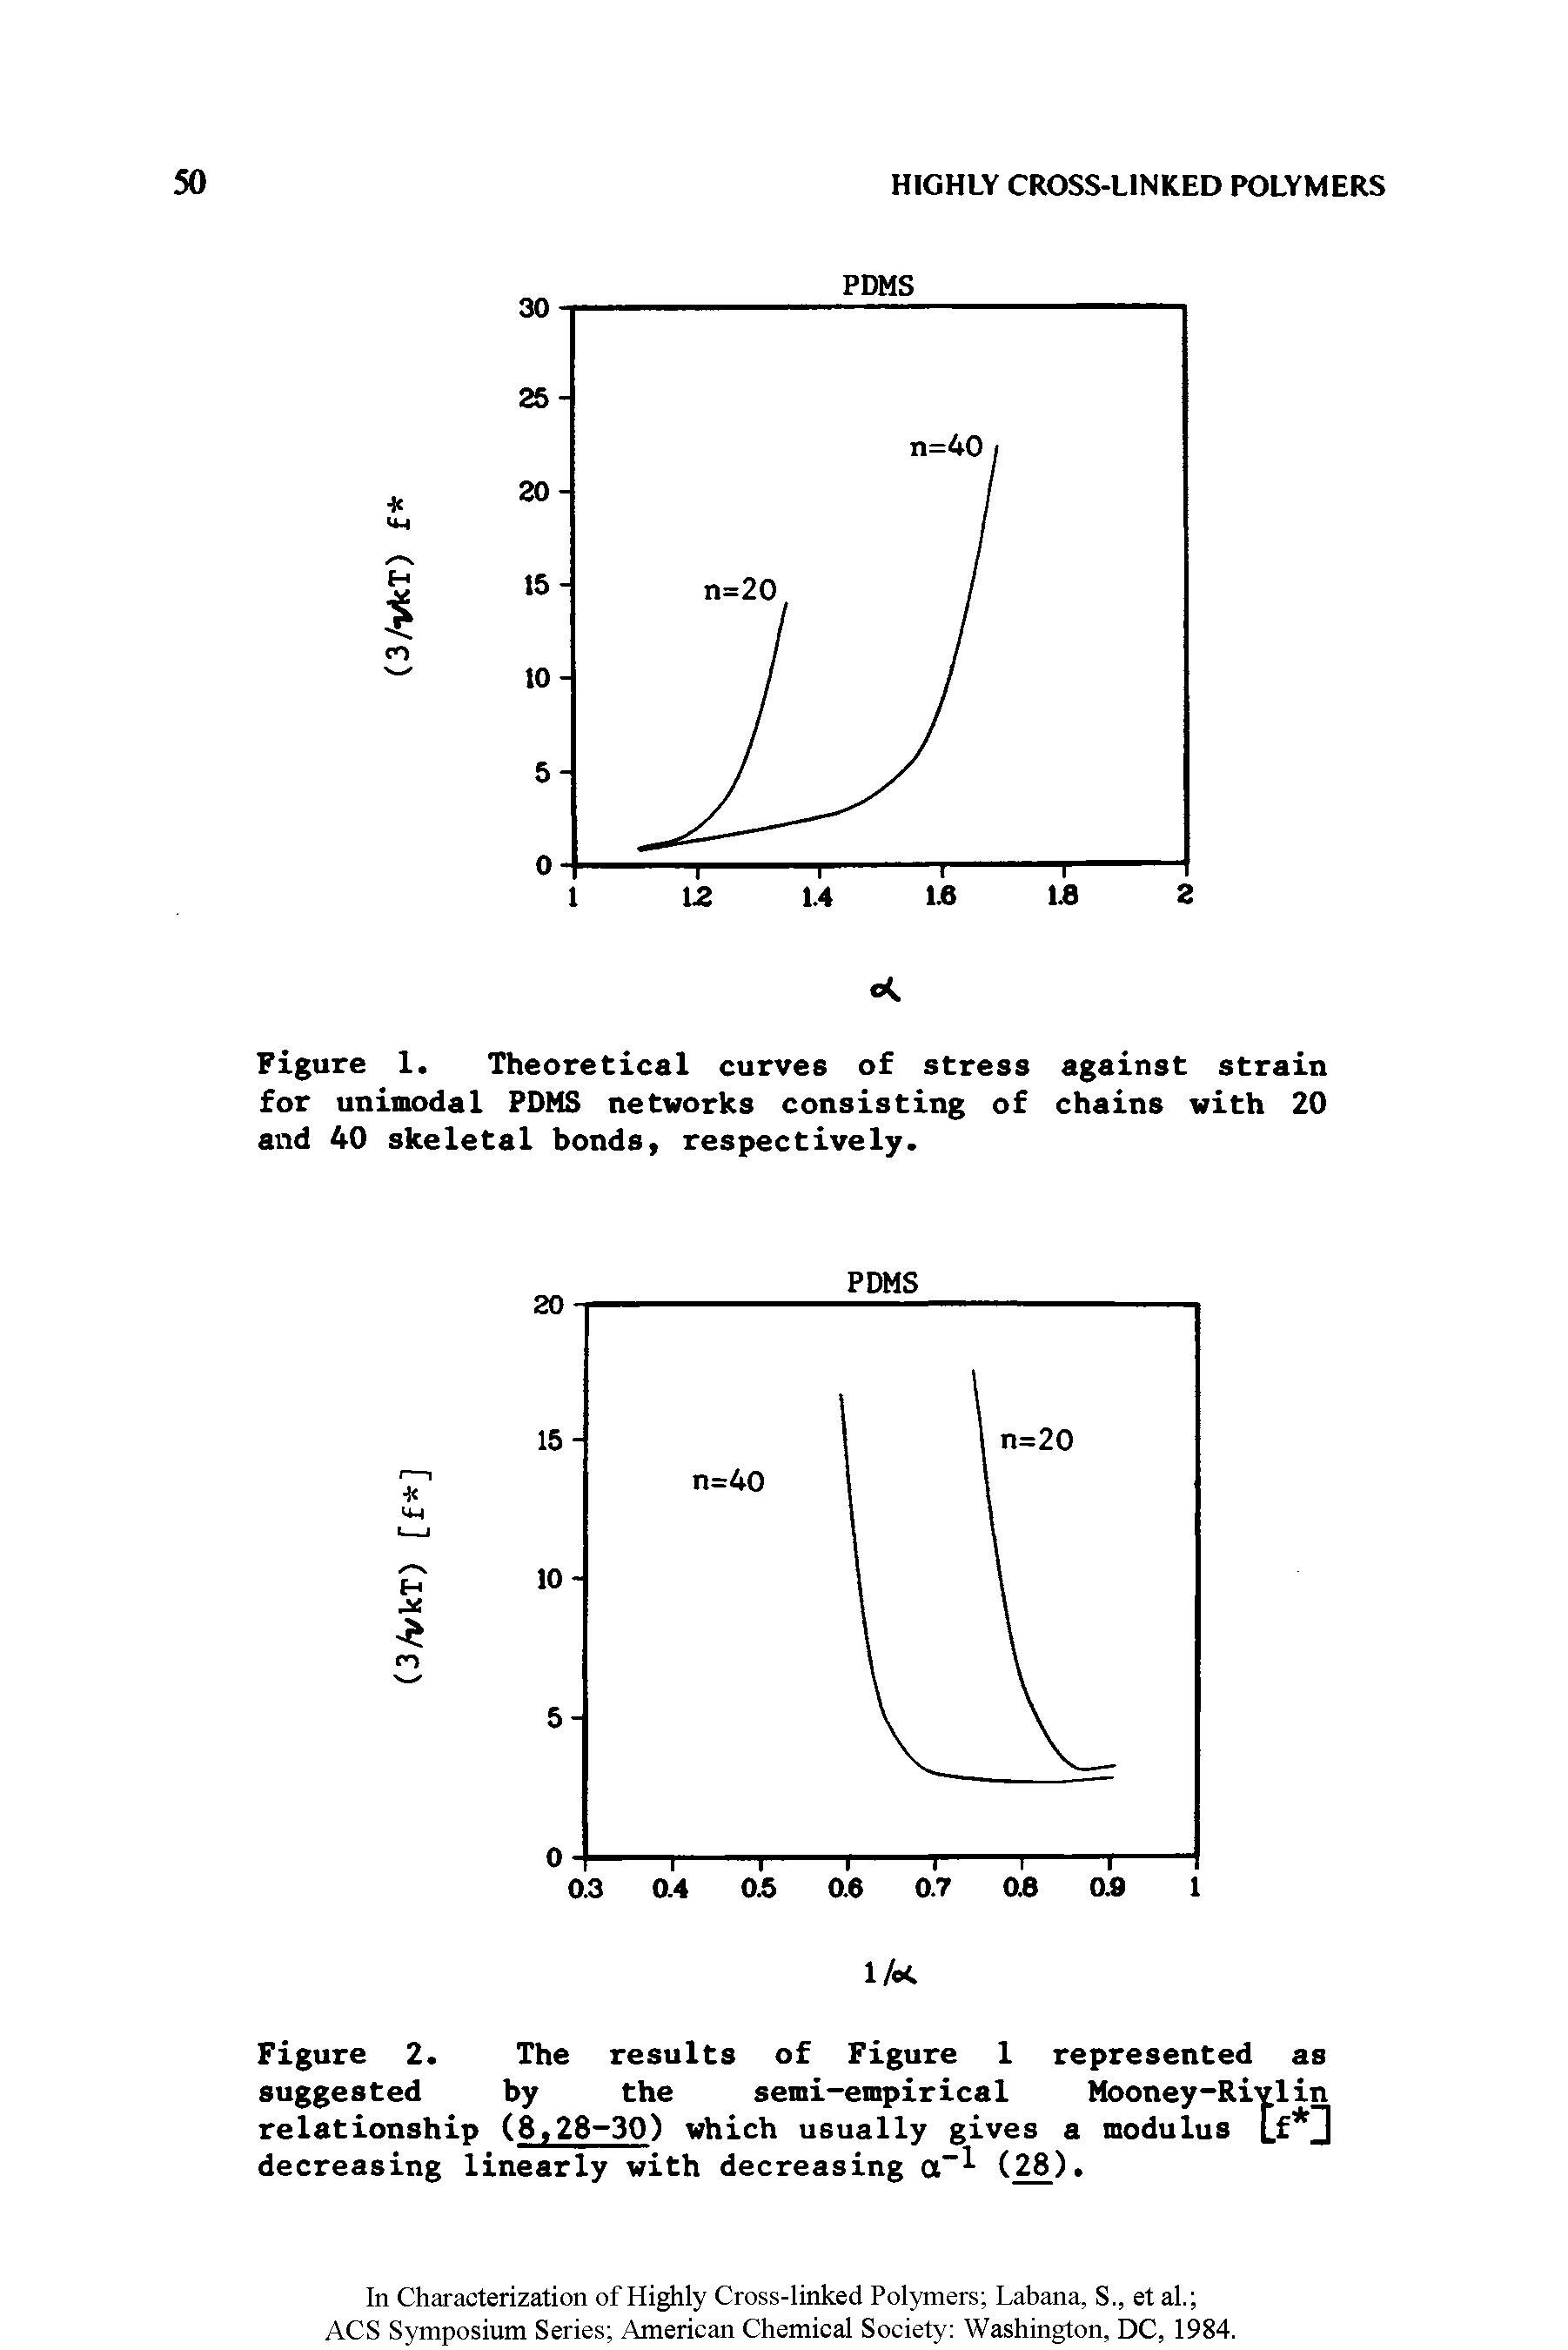 Figure 2. The results of Figure 1 represented as suggested by the semi-empirical Mooney-Rivlin relationship (8,28-30) which usually gives a modulus Lf D decreasing linearly with decreasing a (28).